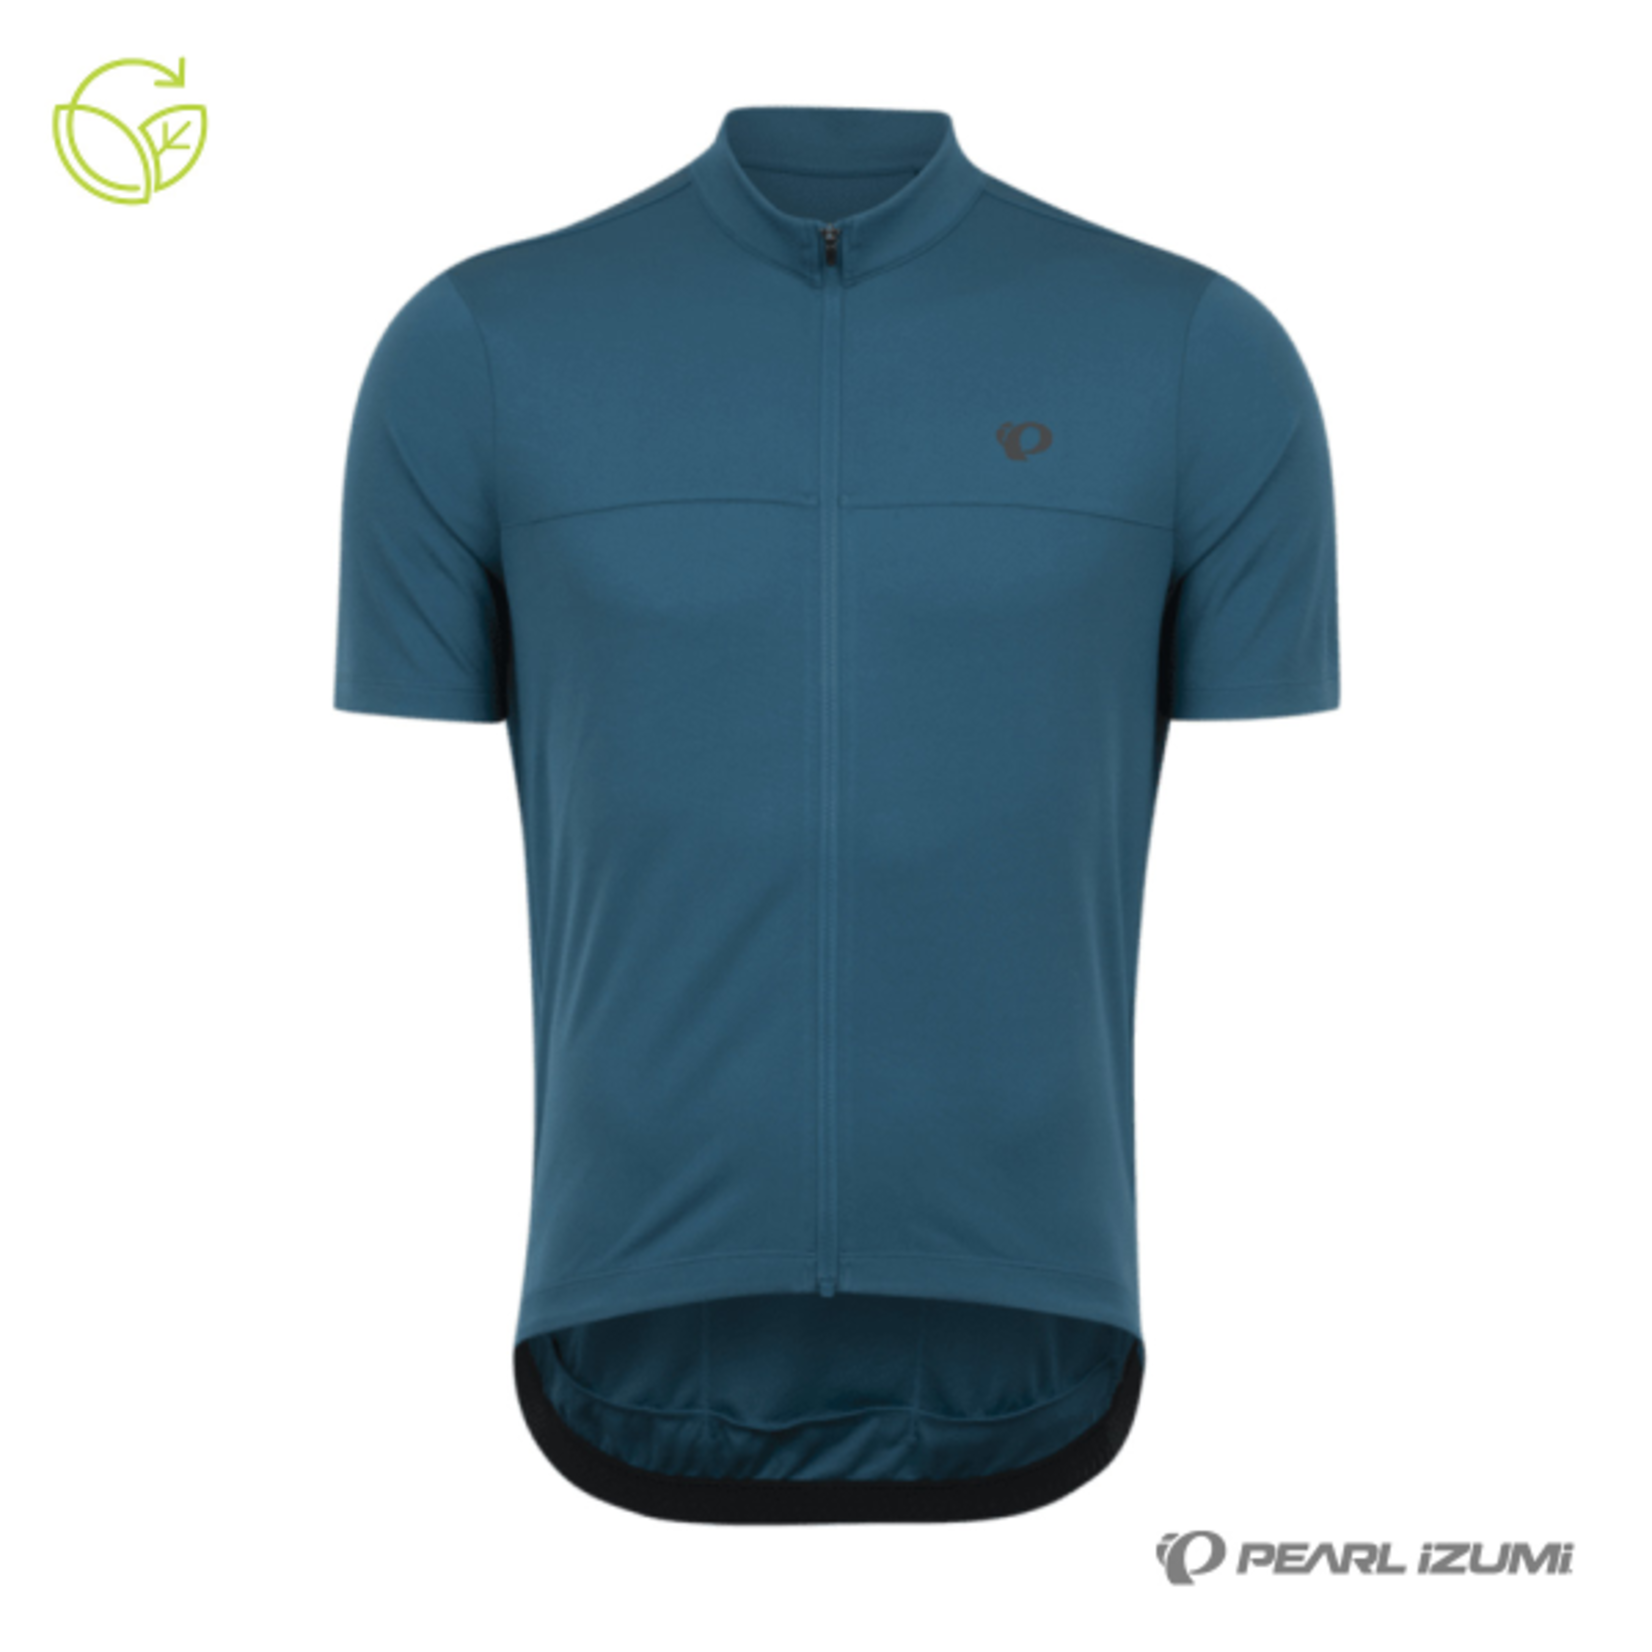 Pearl Izumi Pearl Izumi Quest Short Sleeve Jersey - Ocean Blue - 50% Recycled Material